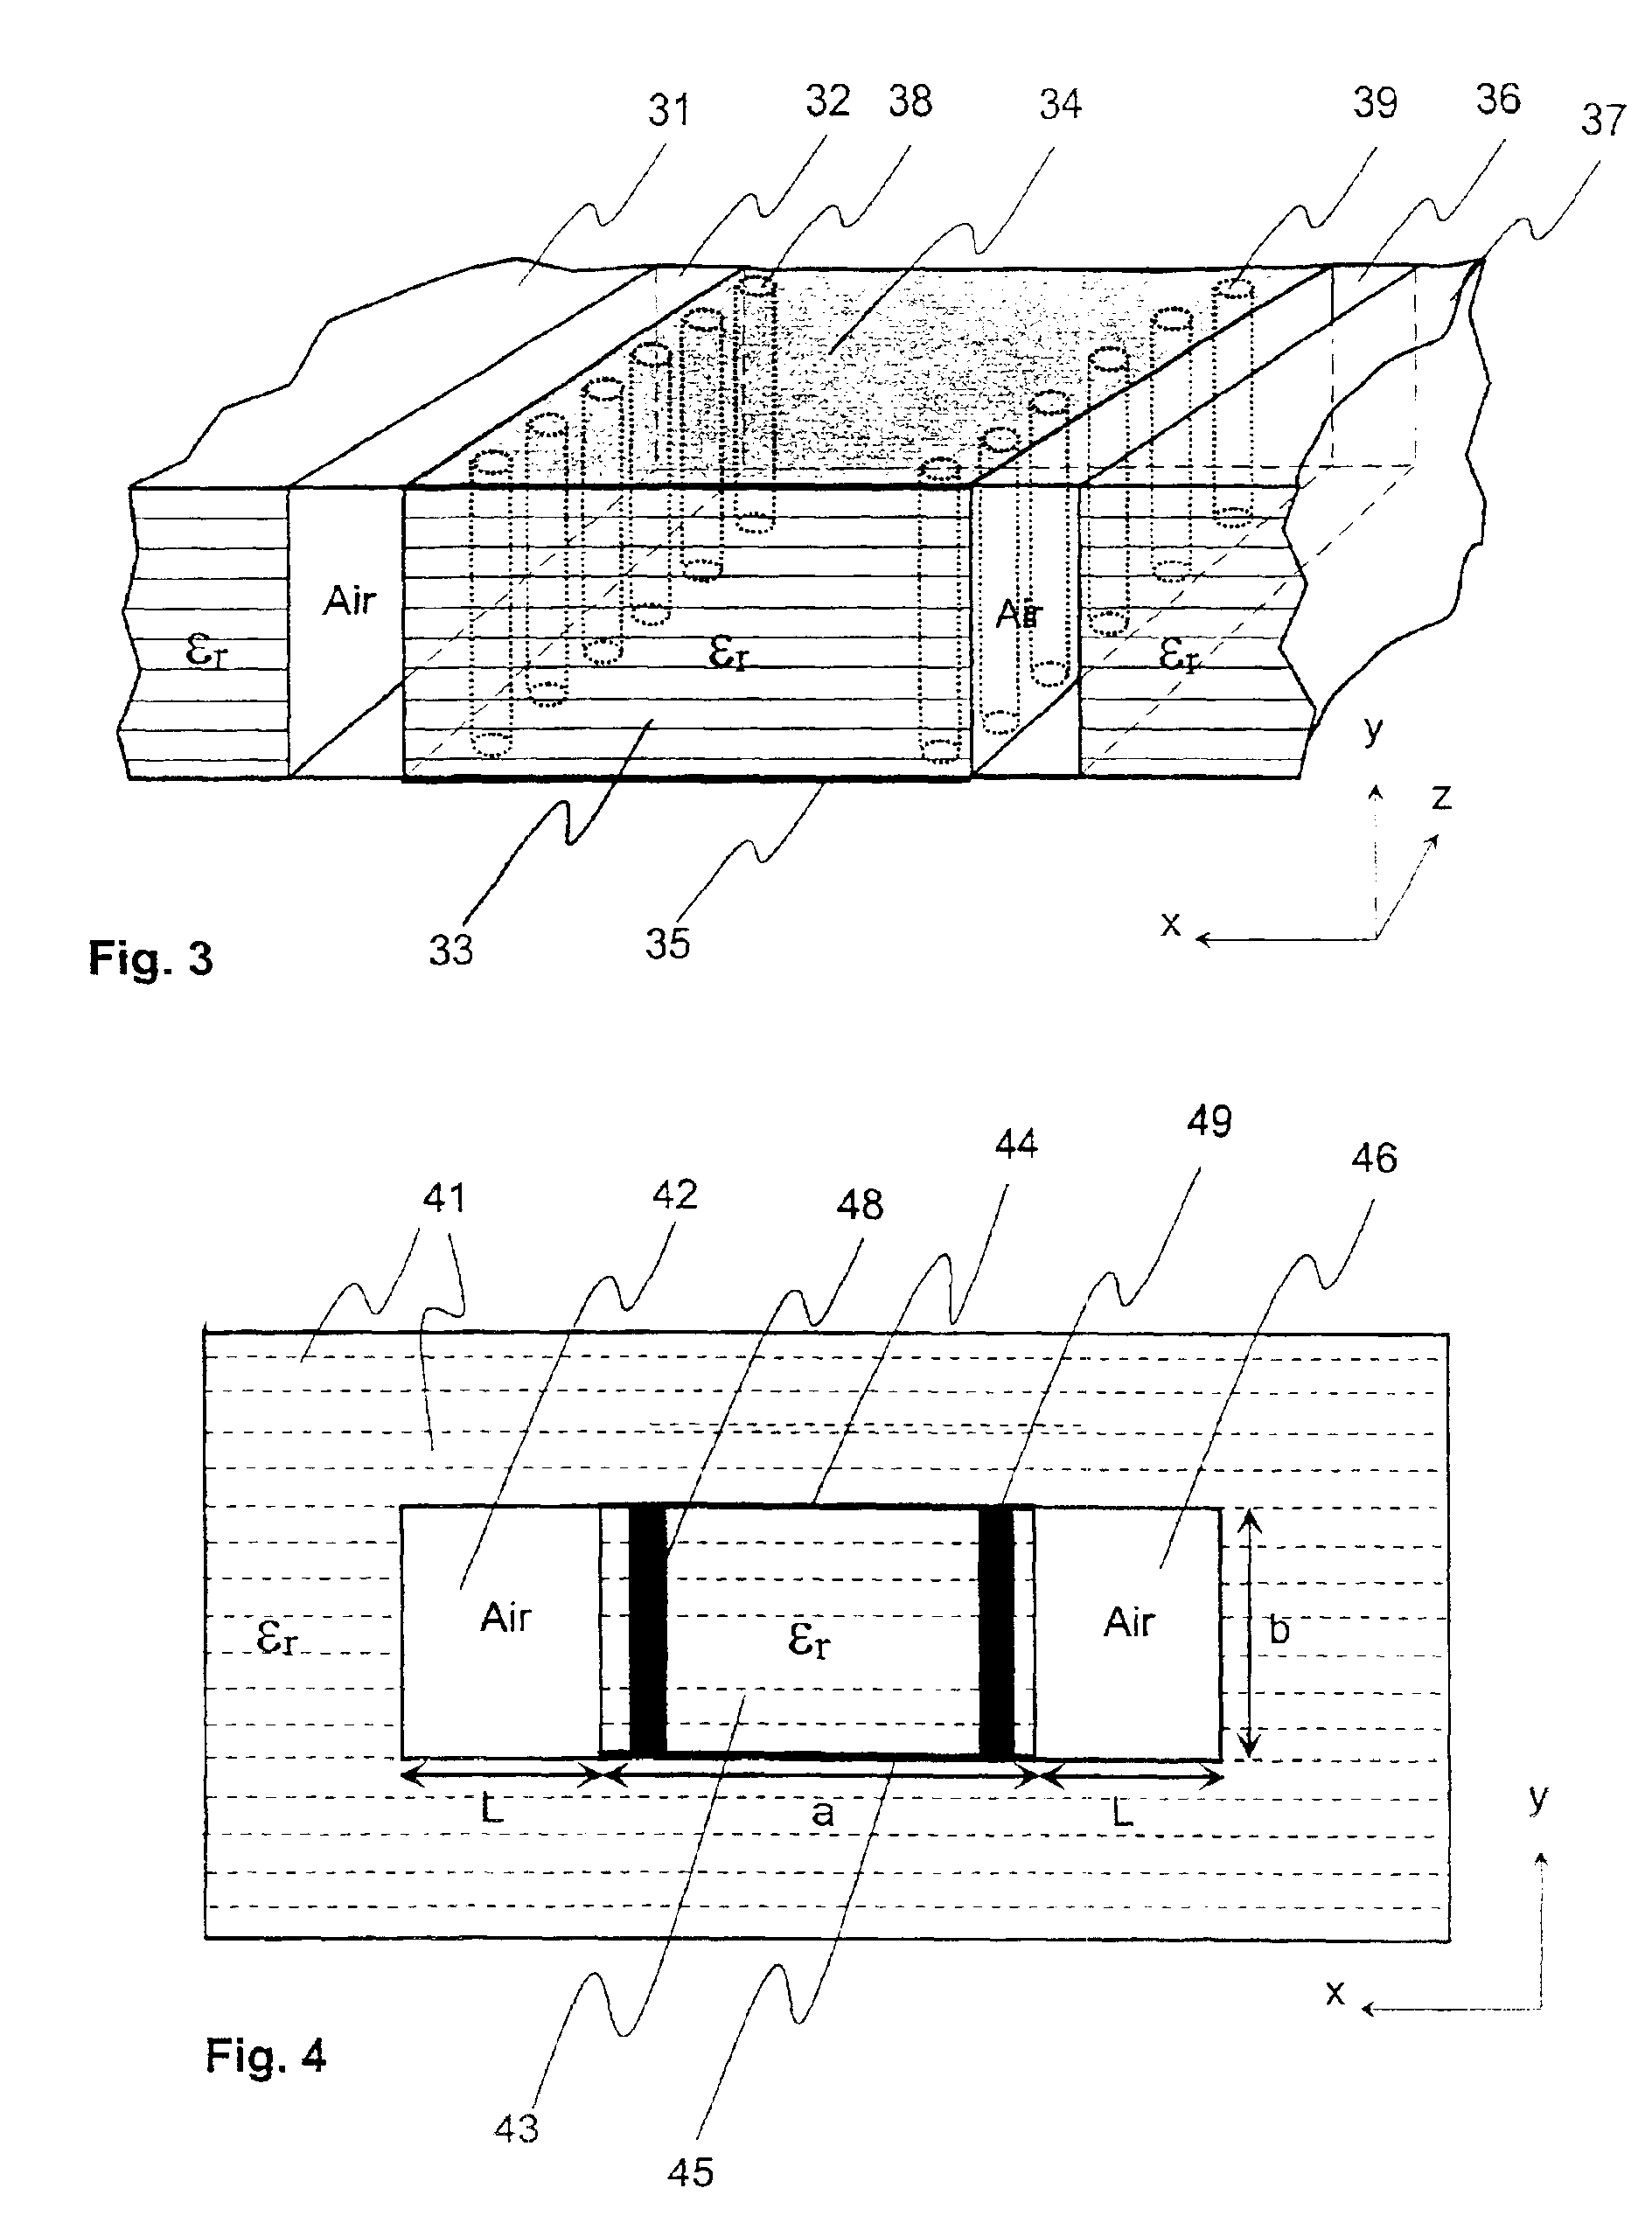 Method for creating waveguides in multilayer ceramic structures and a waveguide having a core bounded by air channels